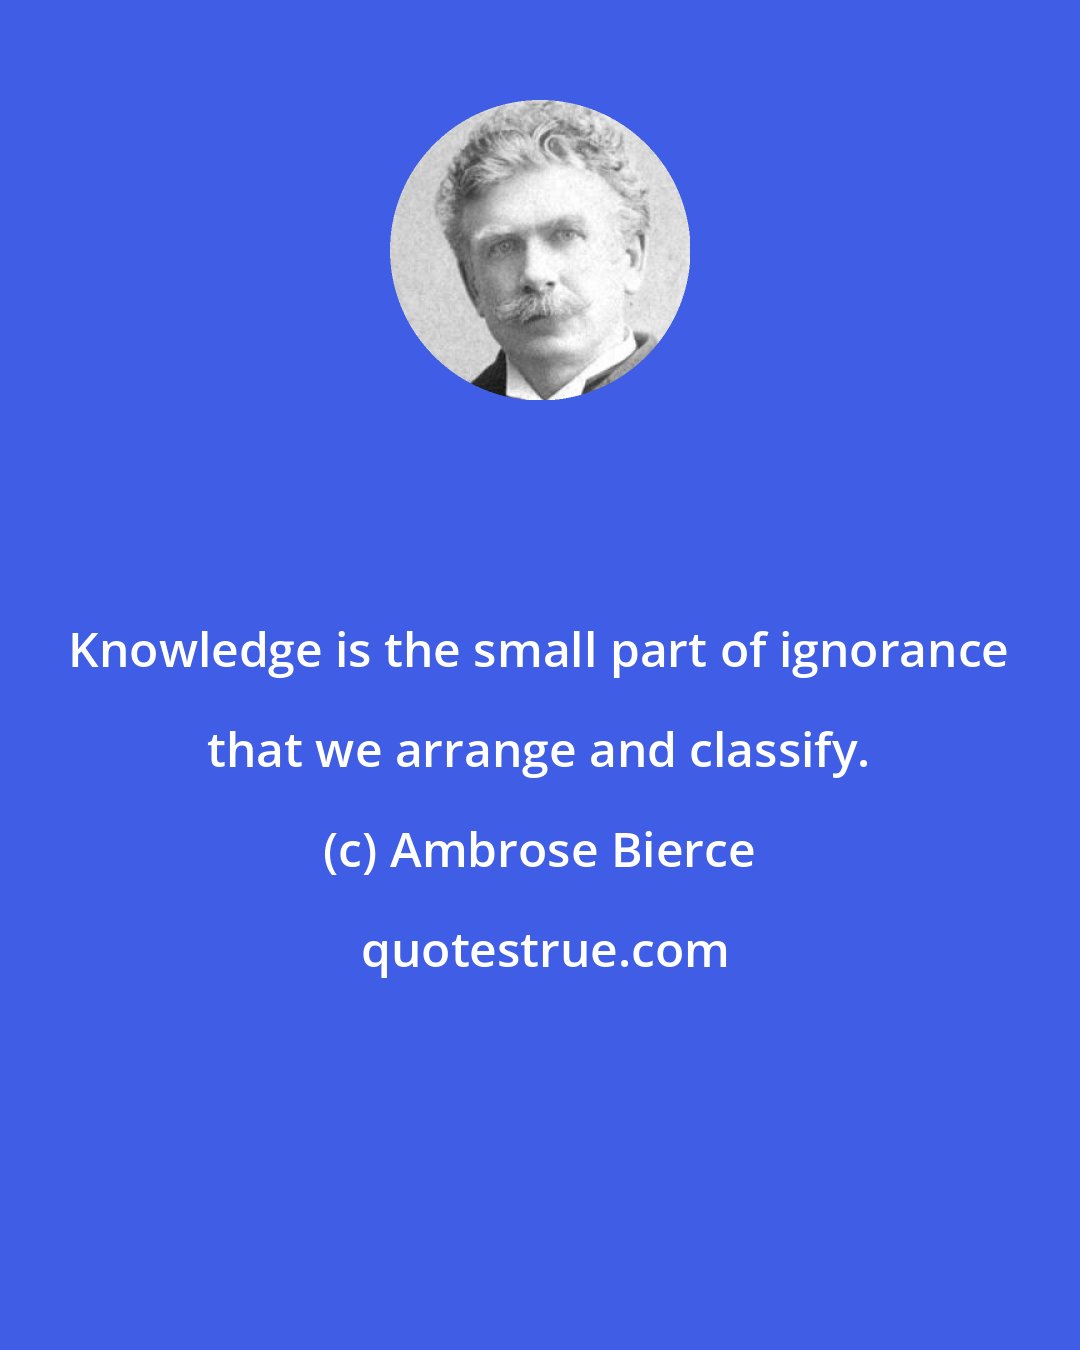 Ambrose Bierce: Knowledge is the small part of ignorance that we arrange and classify.